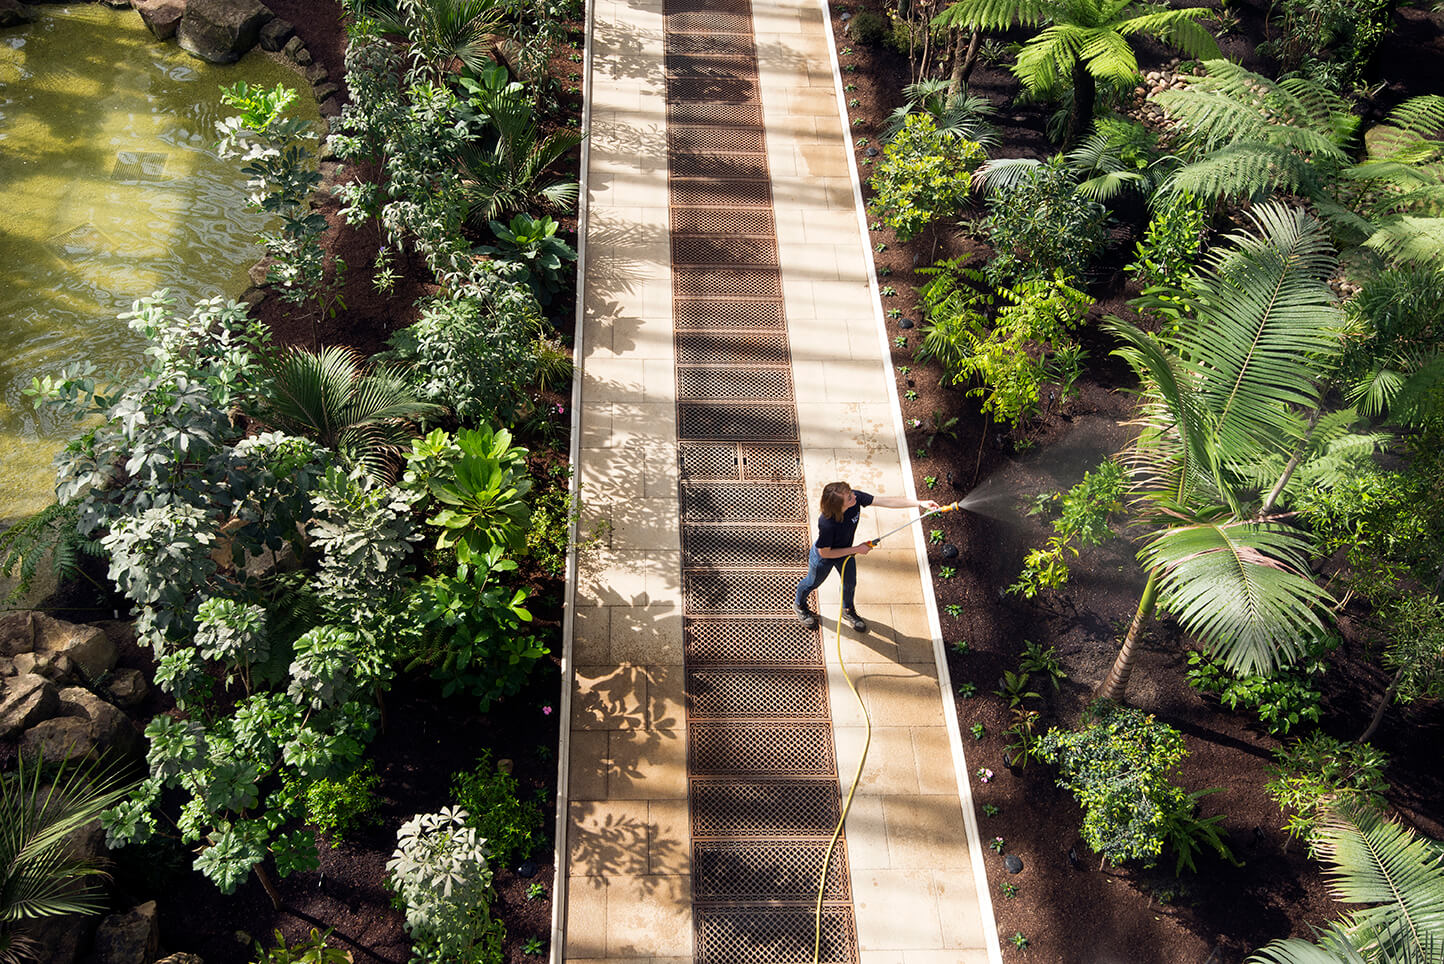 A horticulturalist waters plants in the Temperate House